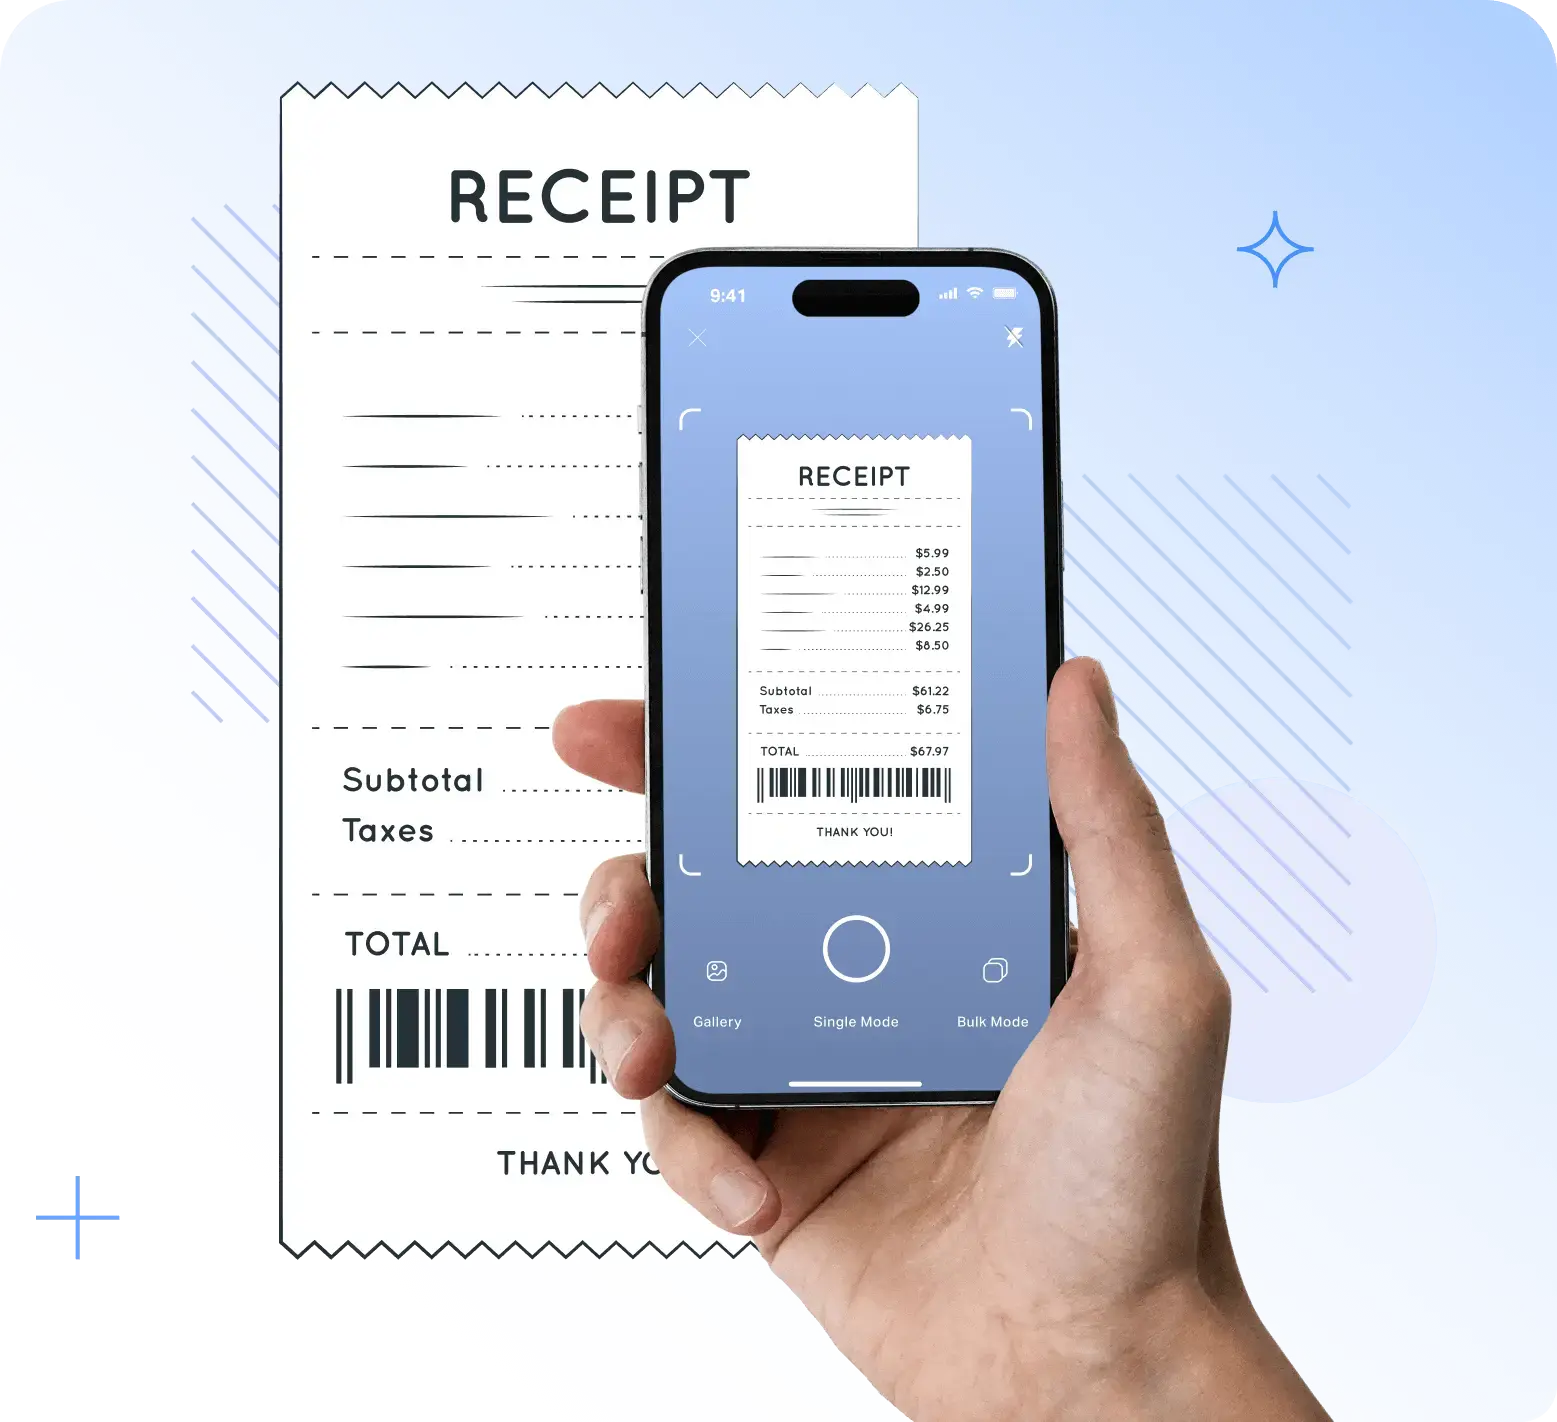 Fyle's receipt and expense management software streamlining receipt tracking